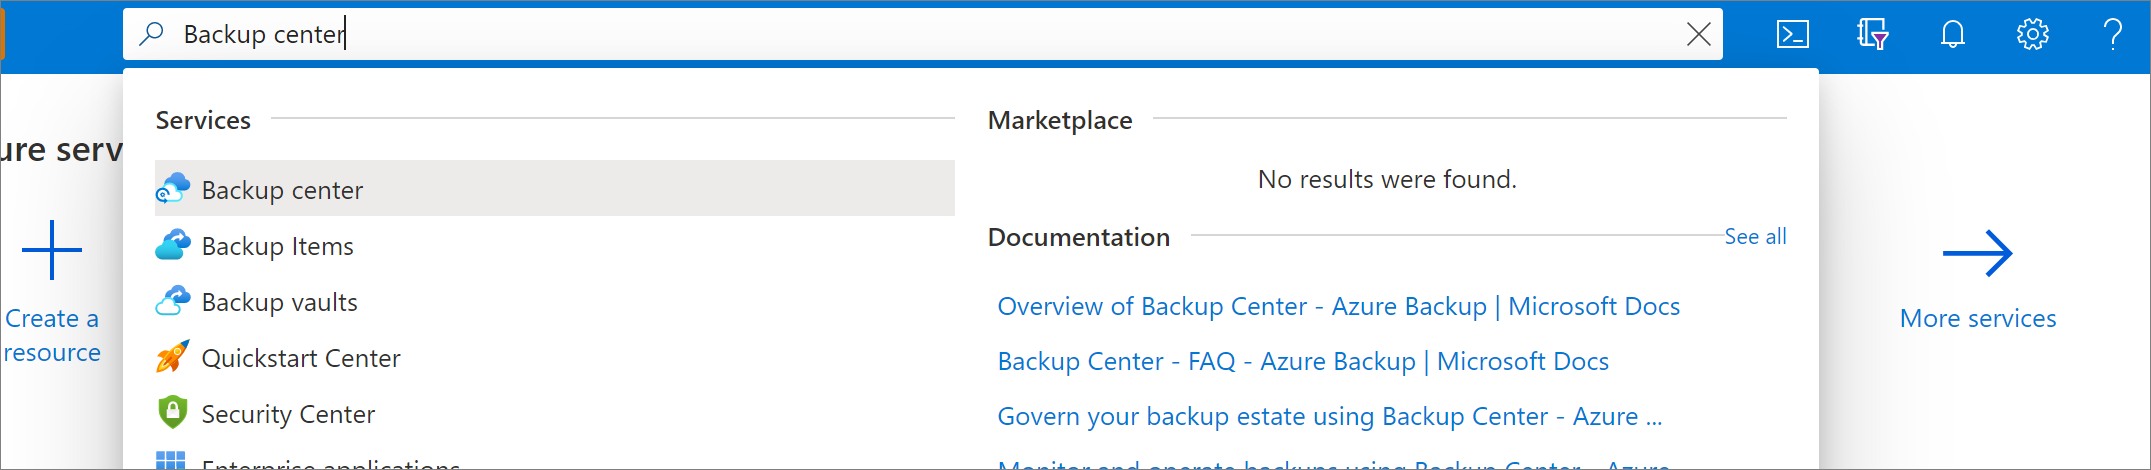 Backup Center Search